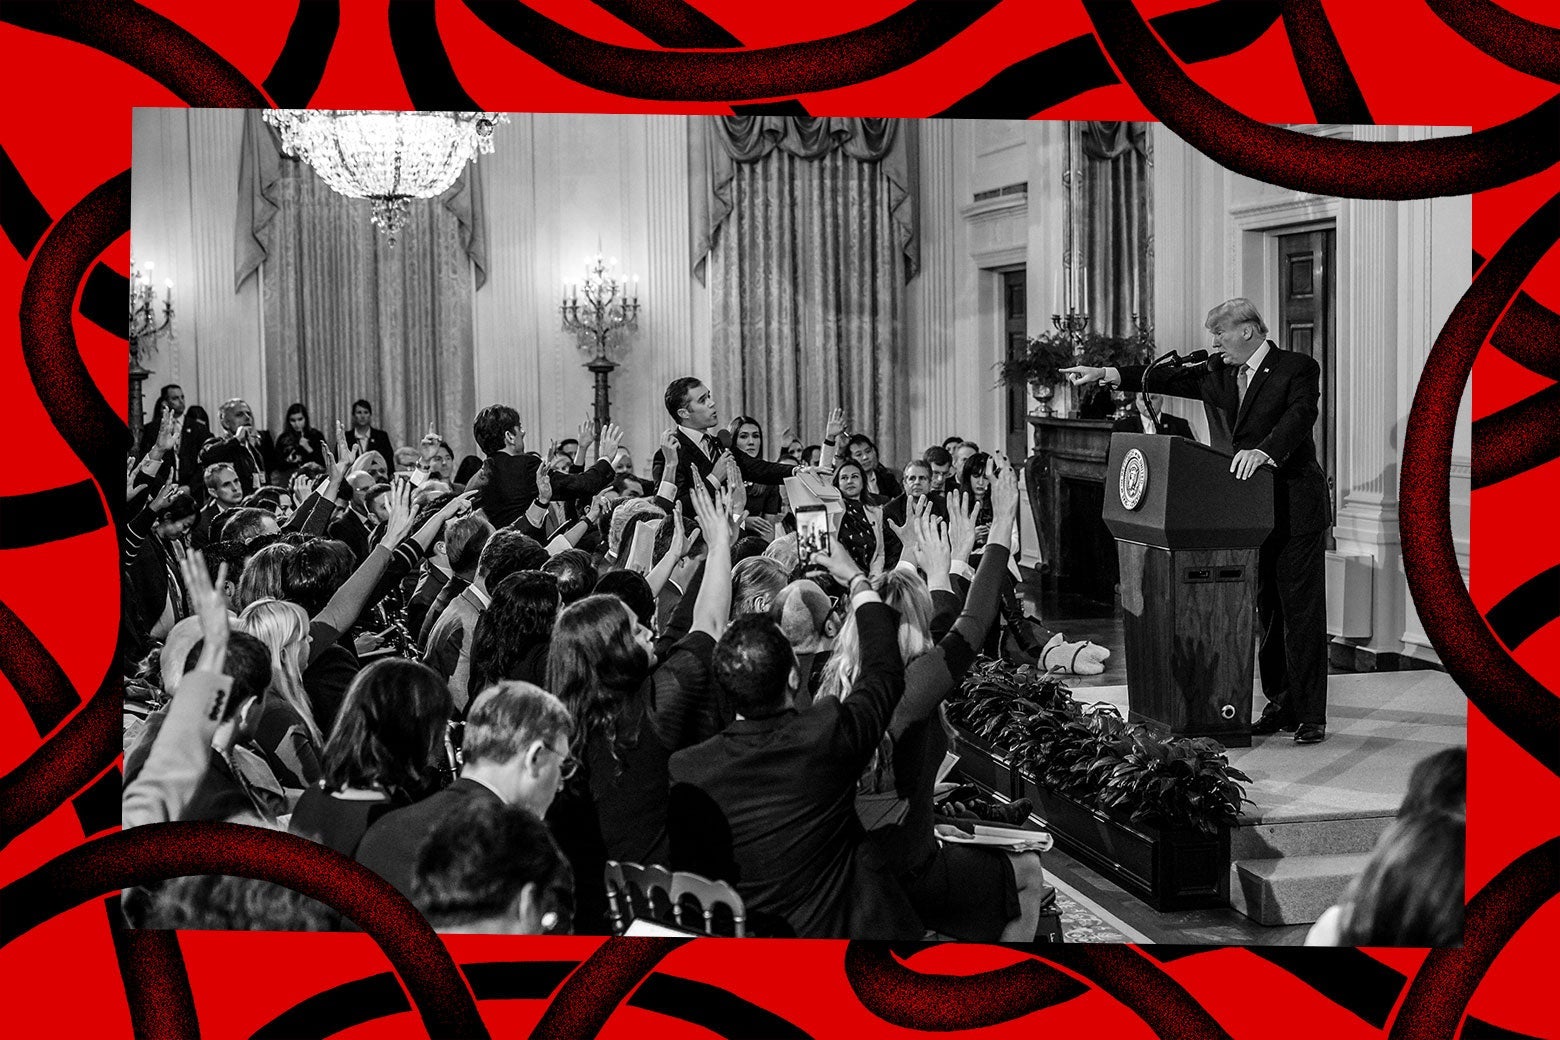 US President Donald Trump points to journalist Jim Acosta(Center L) from CNN during a post-election press conference in the East Room of the White House in Washington, DC on November 7, 2018.